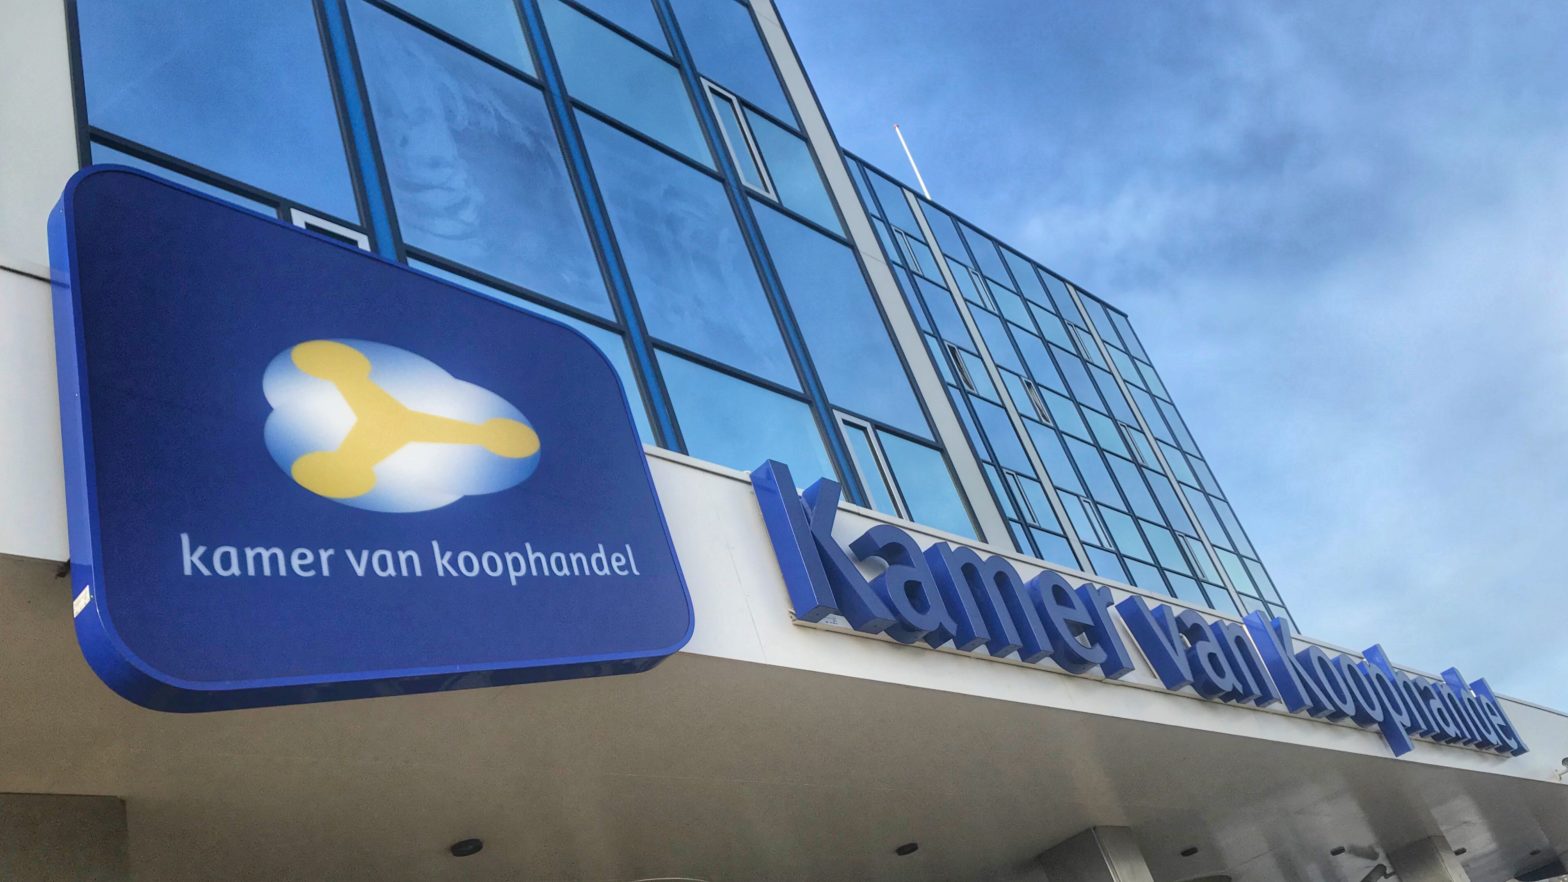 KVK: starting a business in the Netherlands